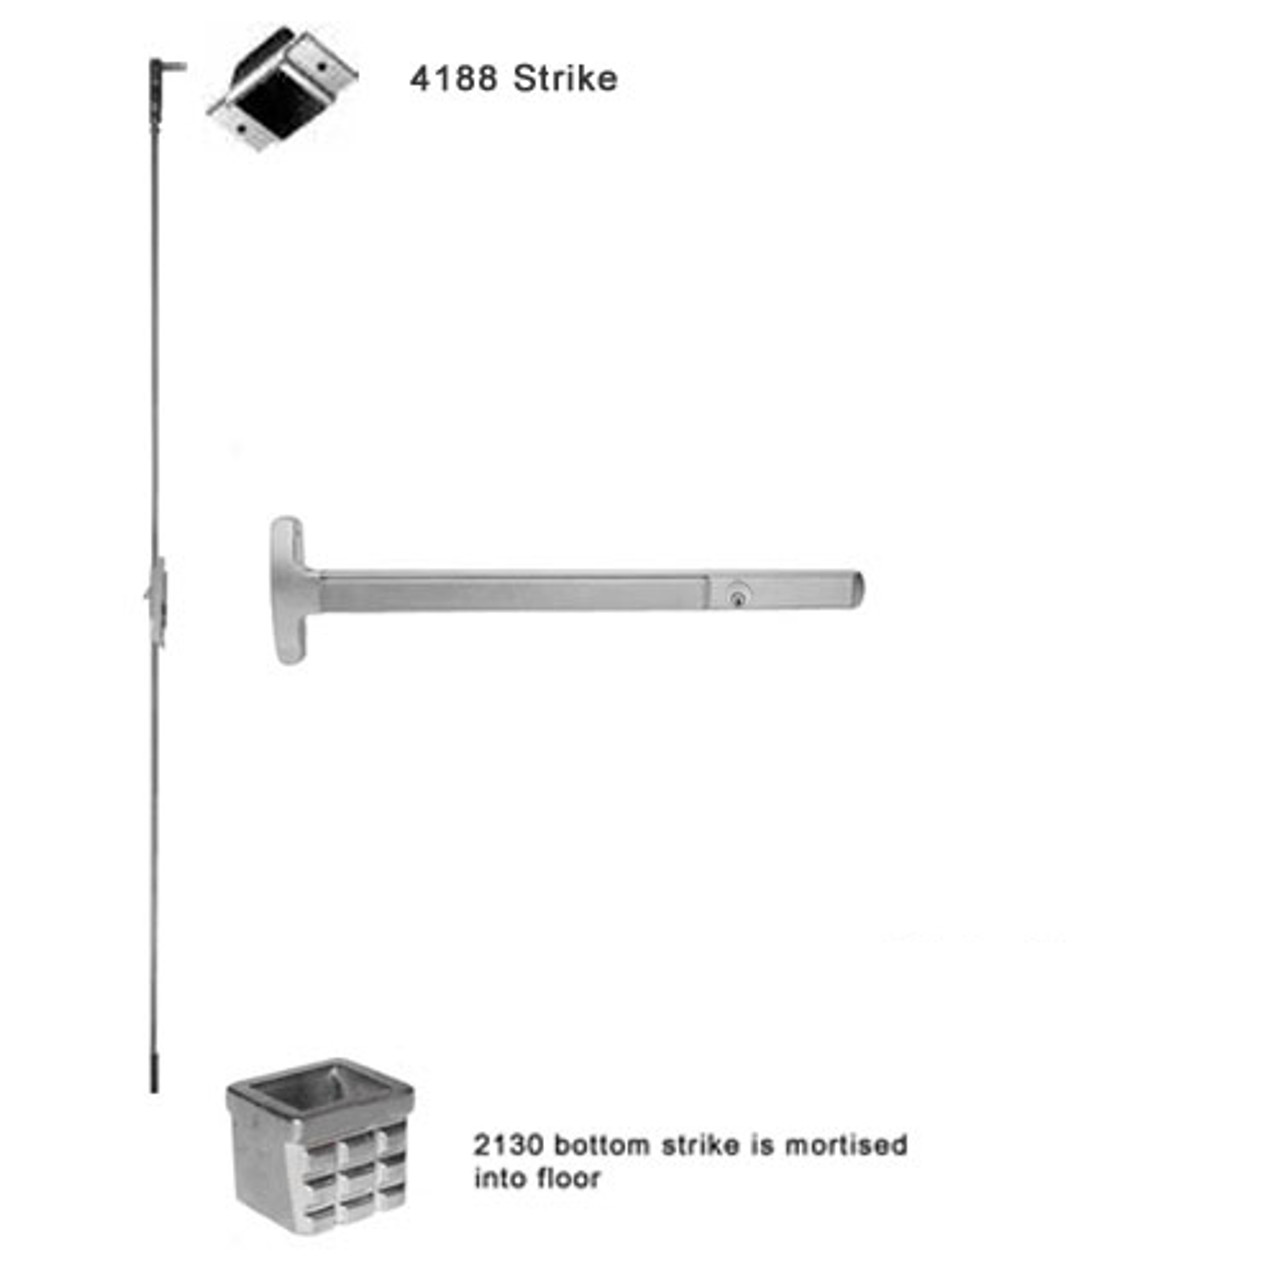 CD24-C-L-NL-DANE-US32-4-LHR Falcon 24 Series Concealed Vertical Rod Device 712L-NL Dane Lever with Night Latch Trim in Polished Stainless Steel